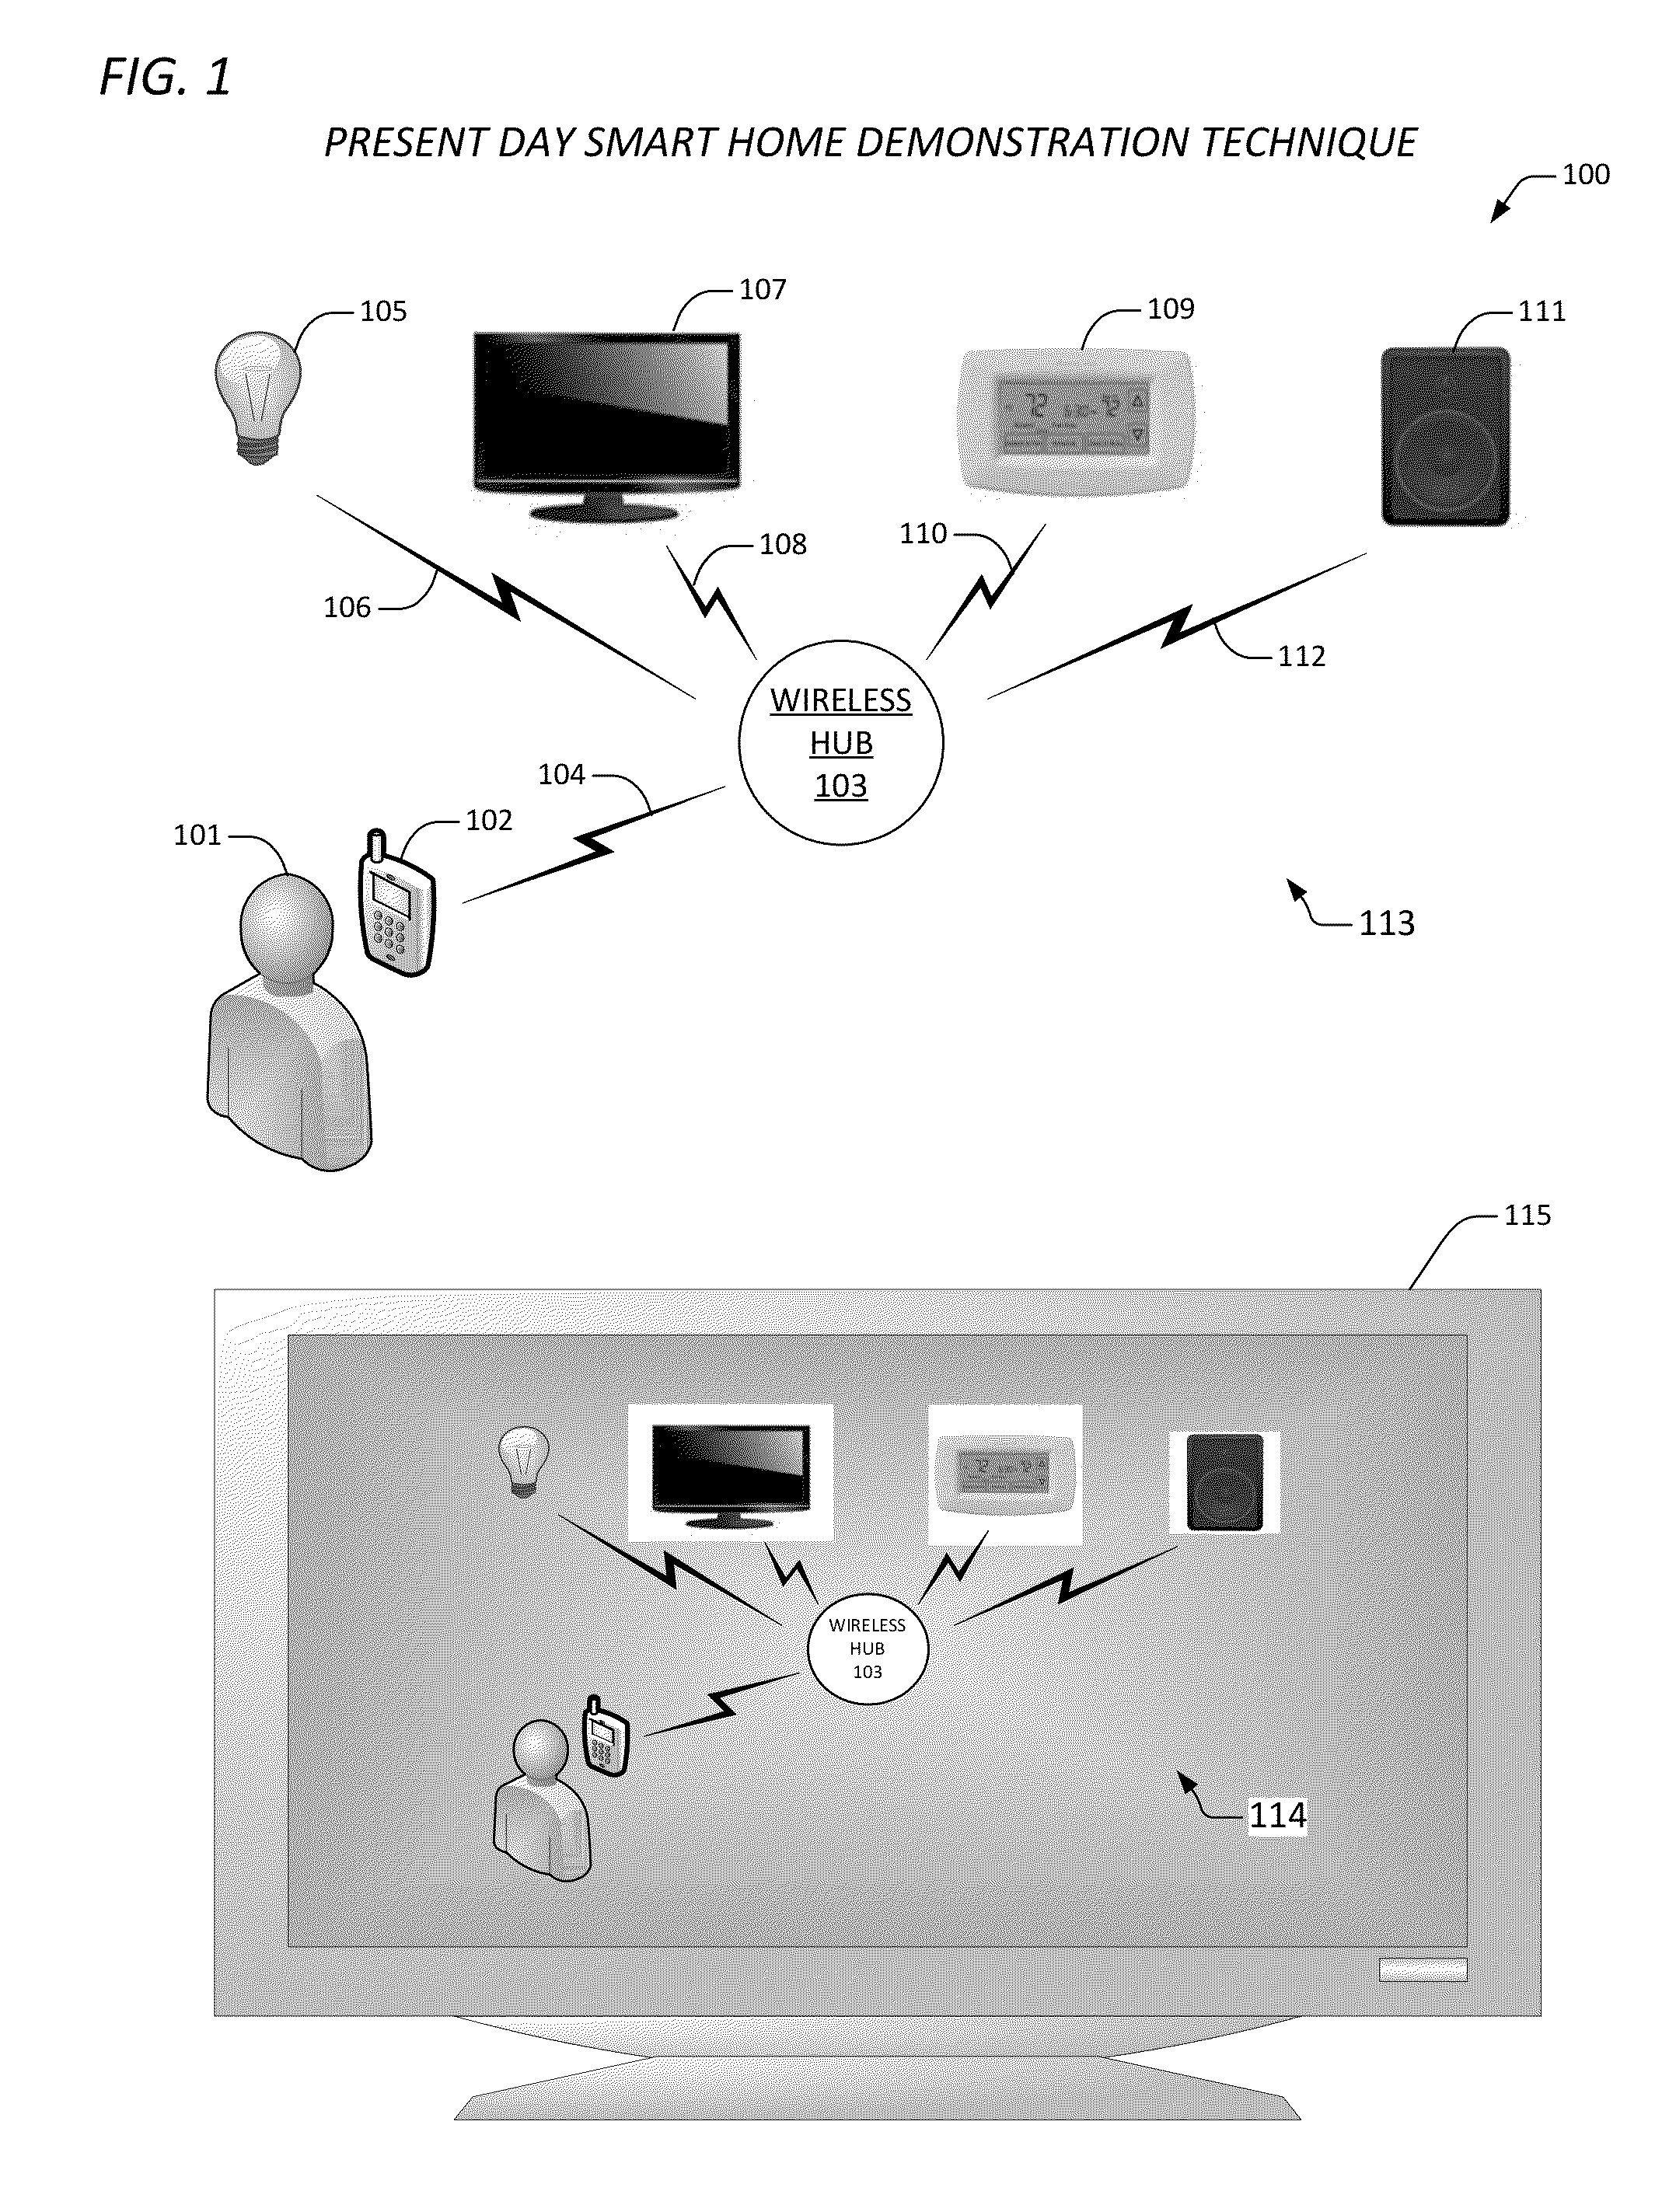 Apparatus and method for the virtual demonstration of a smart phone controlled smart home using a website